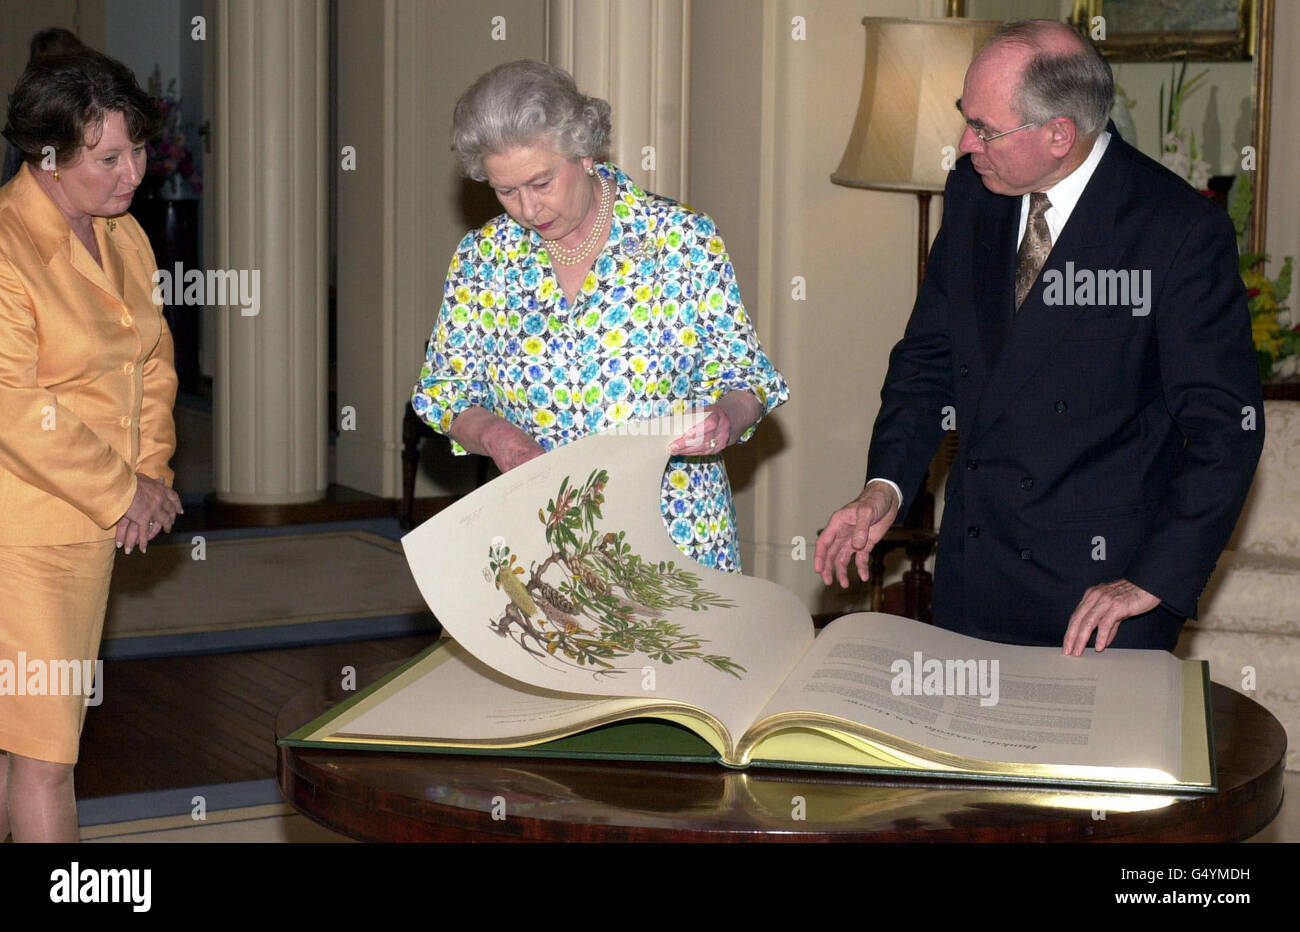 Britain's Queen Elizabeth II (C) with Australian Prime Minister John Howard and his wife Jeanette at Government House in Canberra, where she was presented with the third in a series of books of botanical prints, 'The Banksias'. Stock Photo